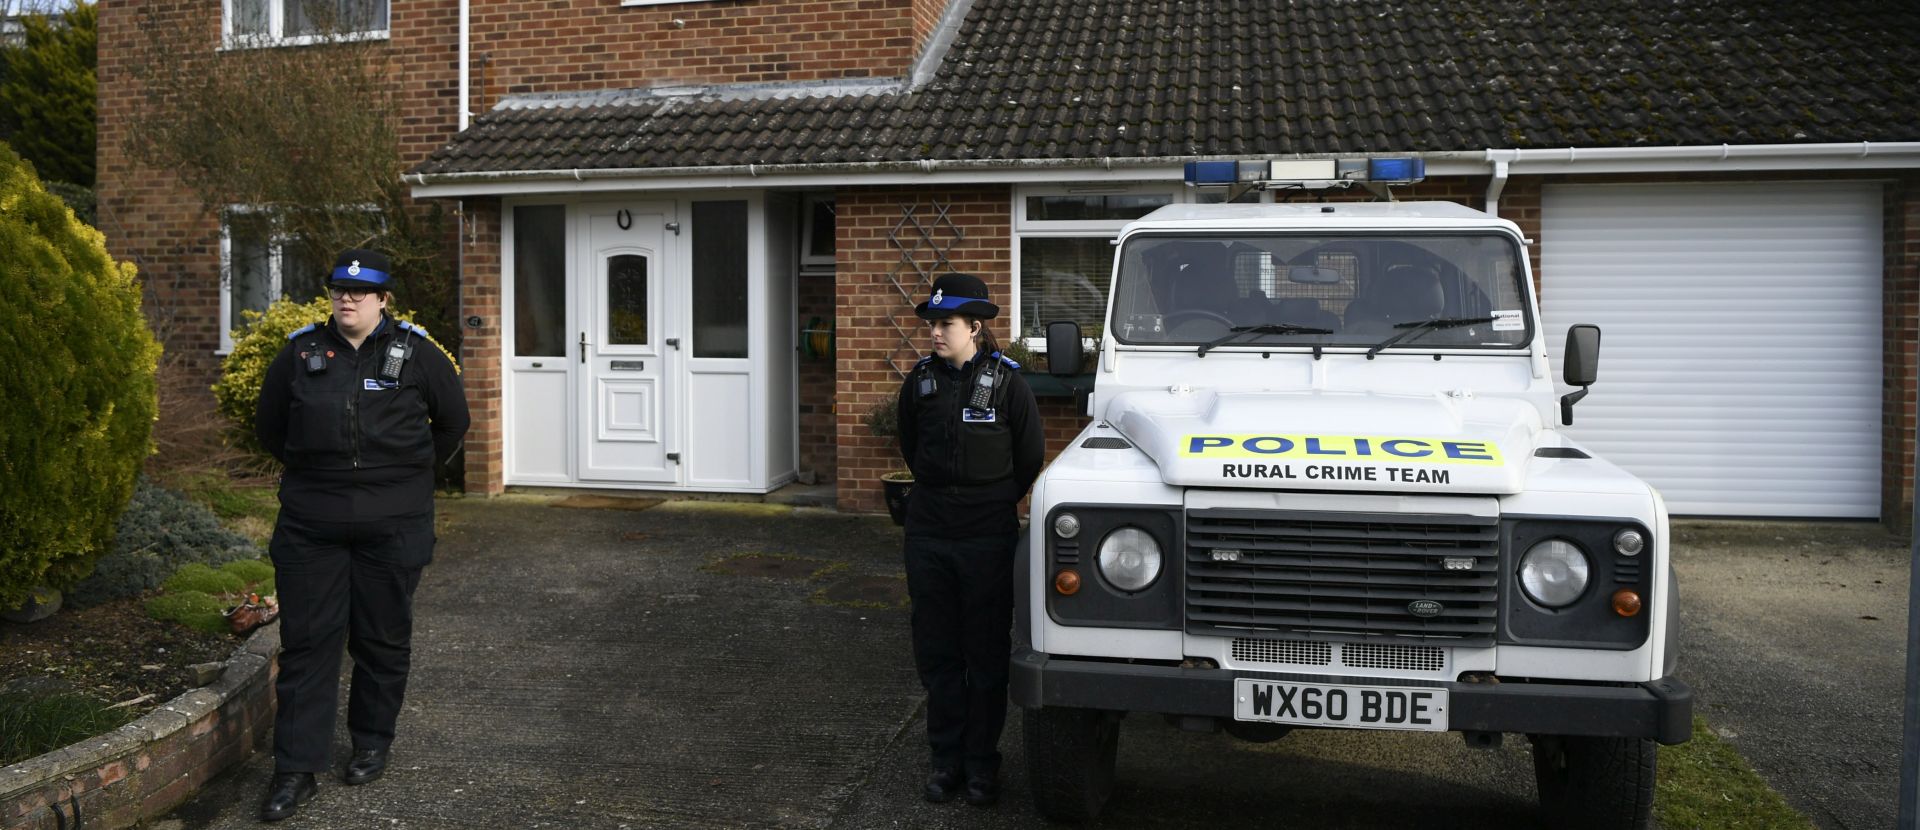 epa06664235 (FILE) - Police stand outside of an address believed to be the home of former Russian spy Sergei Skripal in Salisbury, Britain, 06 March 2018 (re-issued 12 April 2018). Reports on 12 April 20-18 state that  The Organisation for the Prohibition of Chemical Weapons (OPCW) transmitted on 11 April to the United Kingdom of Great Britain and Northern Ireland (UK) the report of the OPCW’s mission to provide requested technical assistance in regard to the Salisbury incident on 04 March 2018. The OPCW states that the results of analysis by the OPCW designated laboratories of environmental and biomedical samples collected by the OPCW team confirm the findings of the United Kingdom relating to the identity of the toxic chemical that was used in Salisbury and severely injured three people.  EPA/NEIL HALL